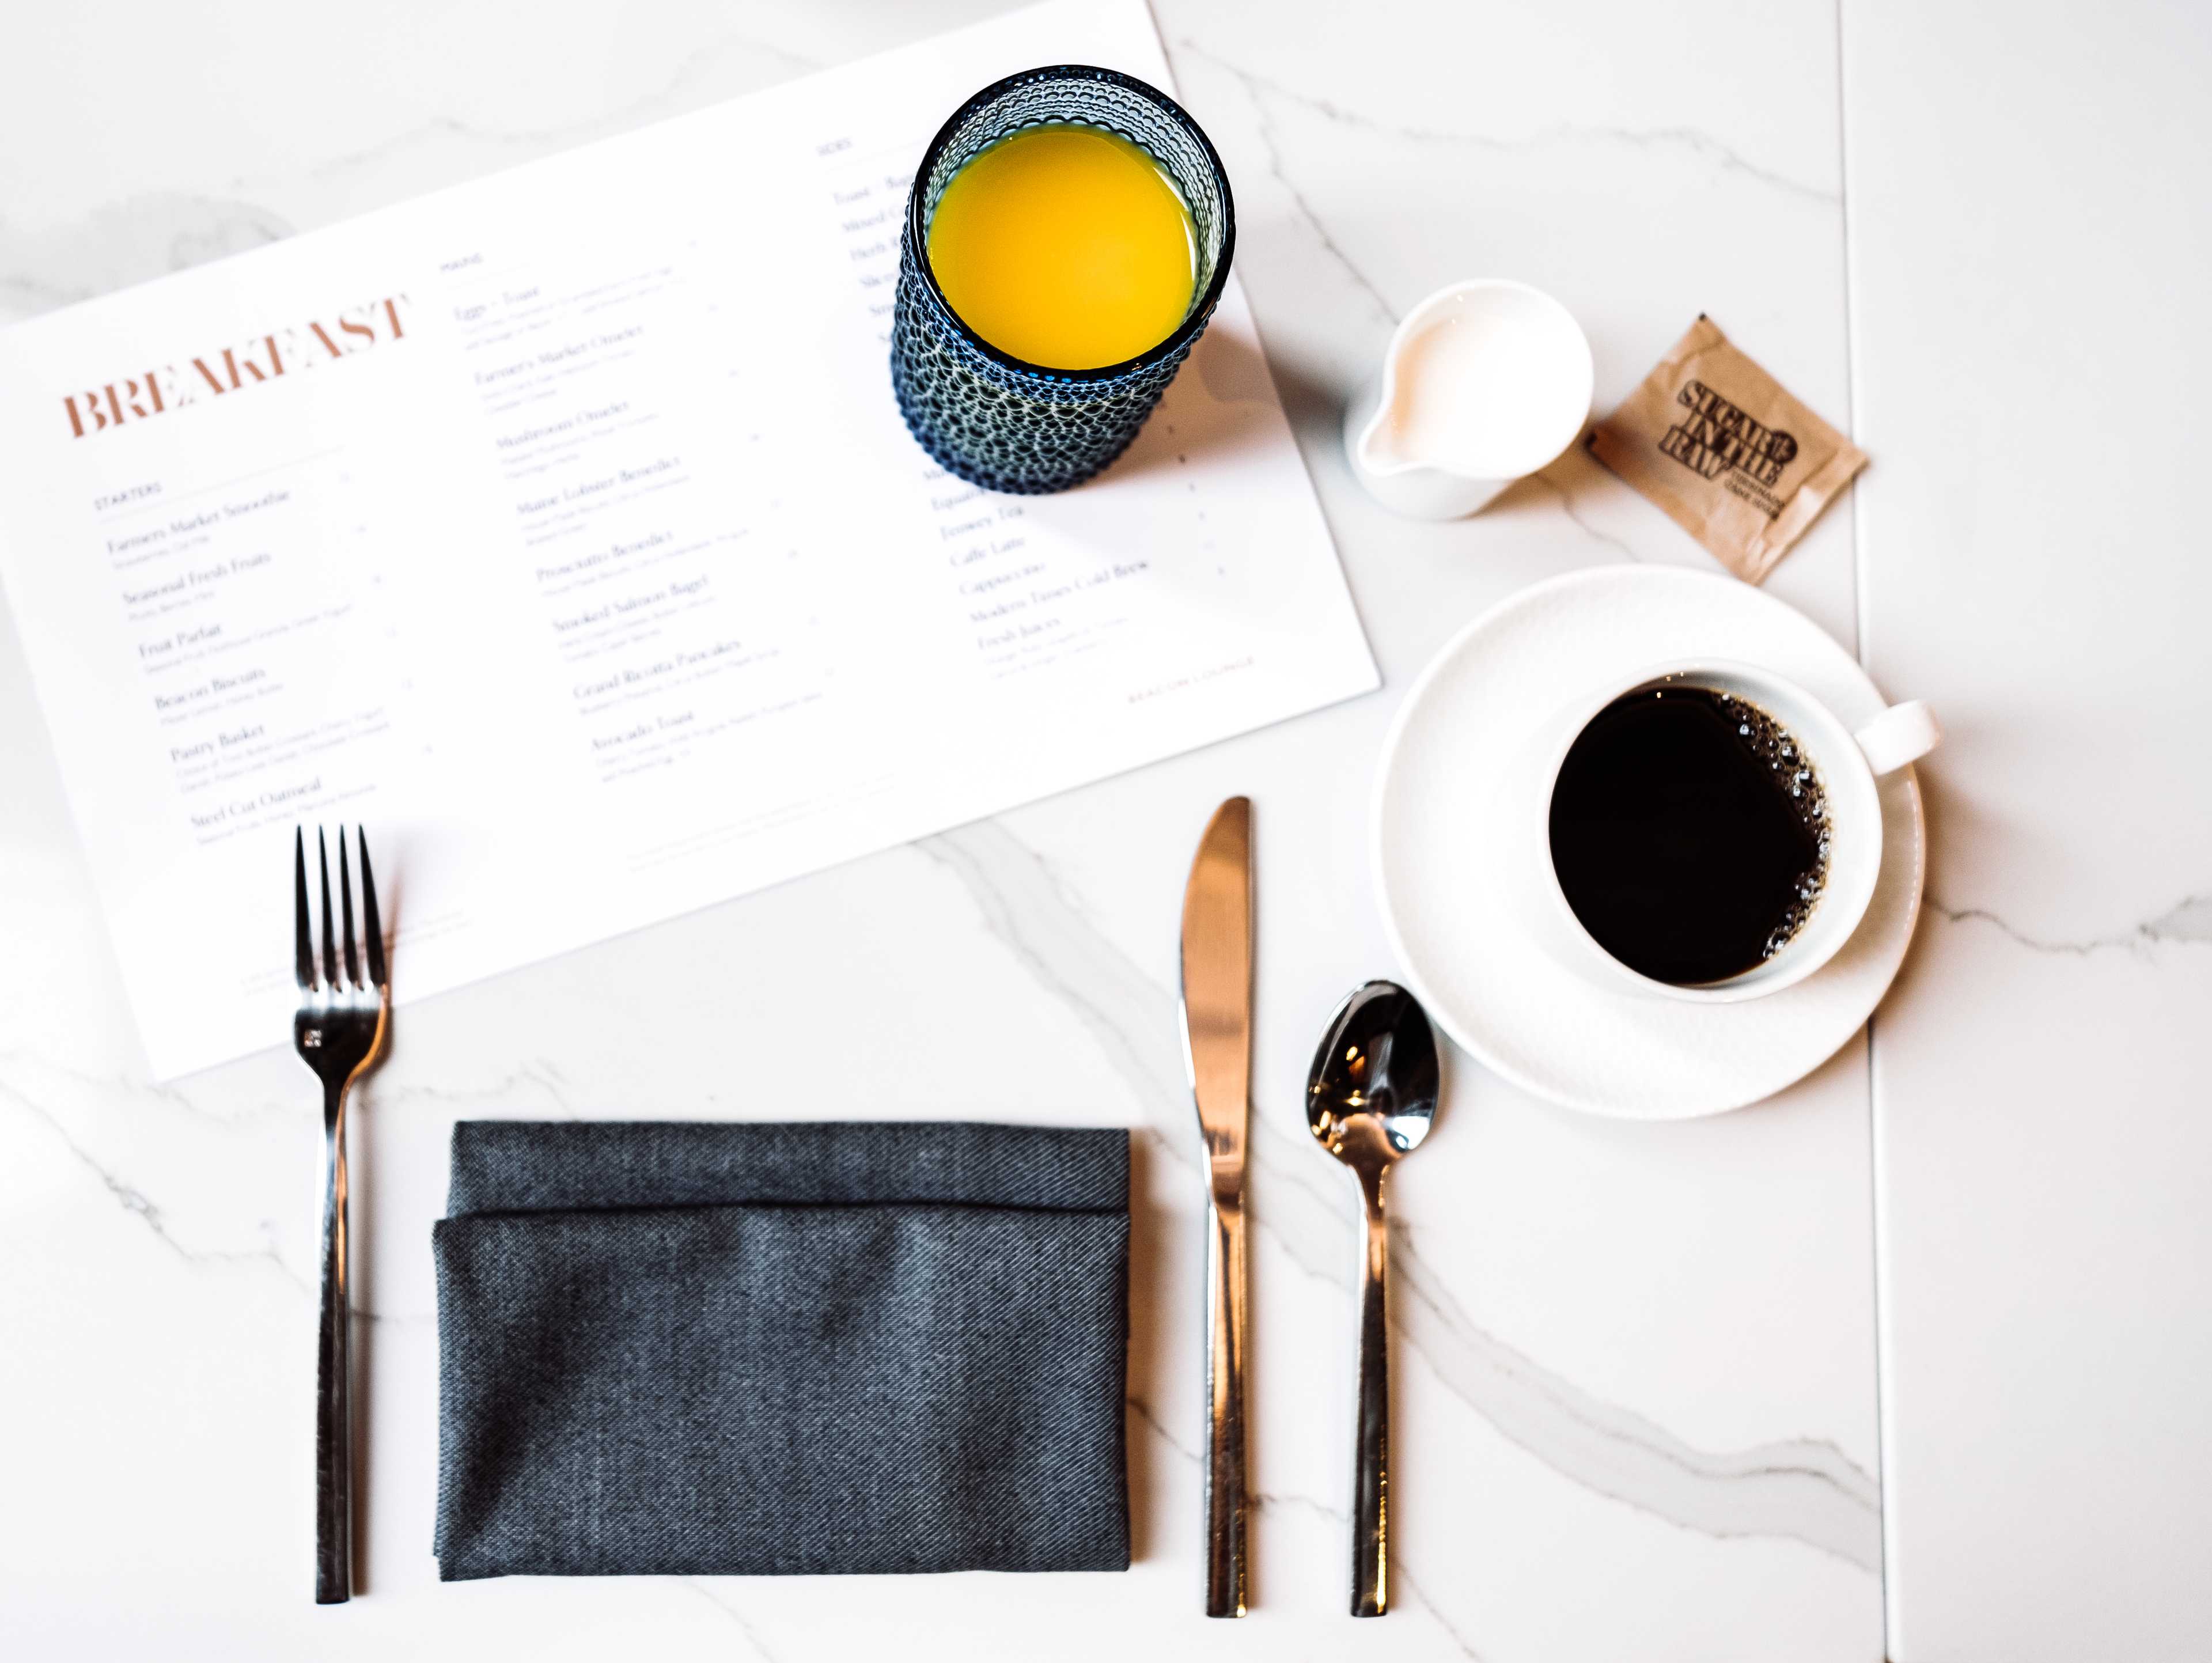 a breakfast menu with orange juice and forks on a marble table.